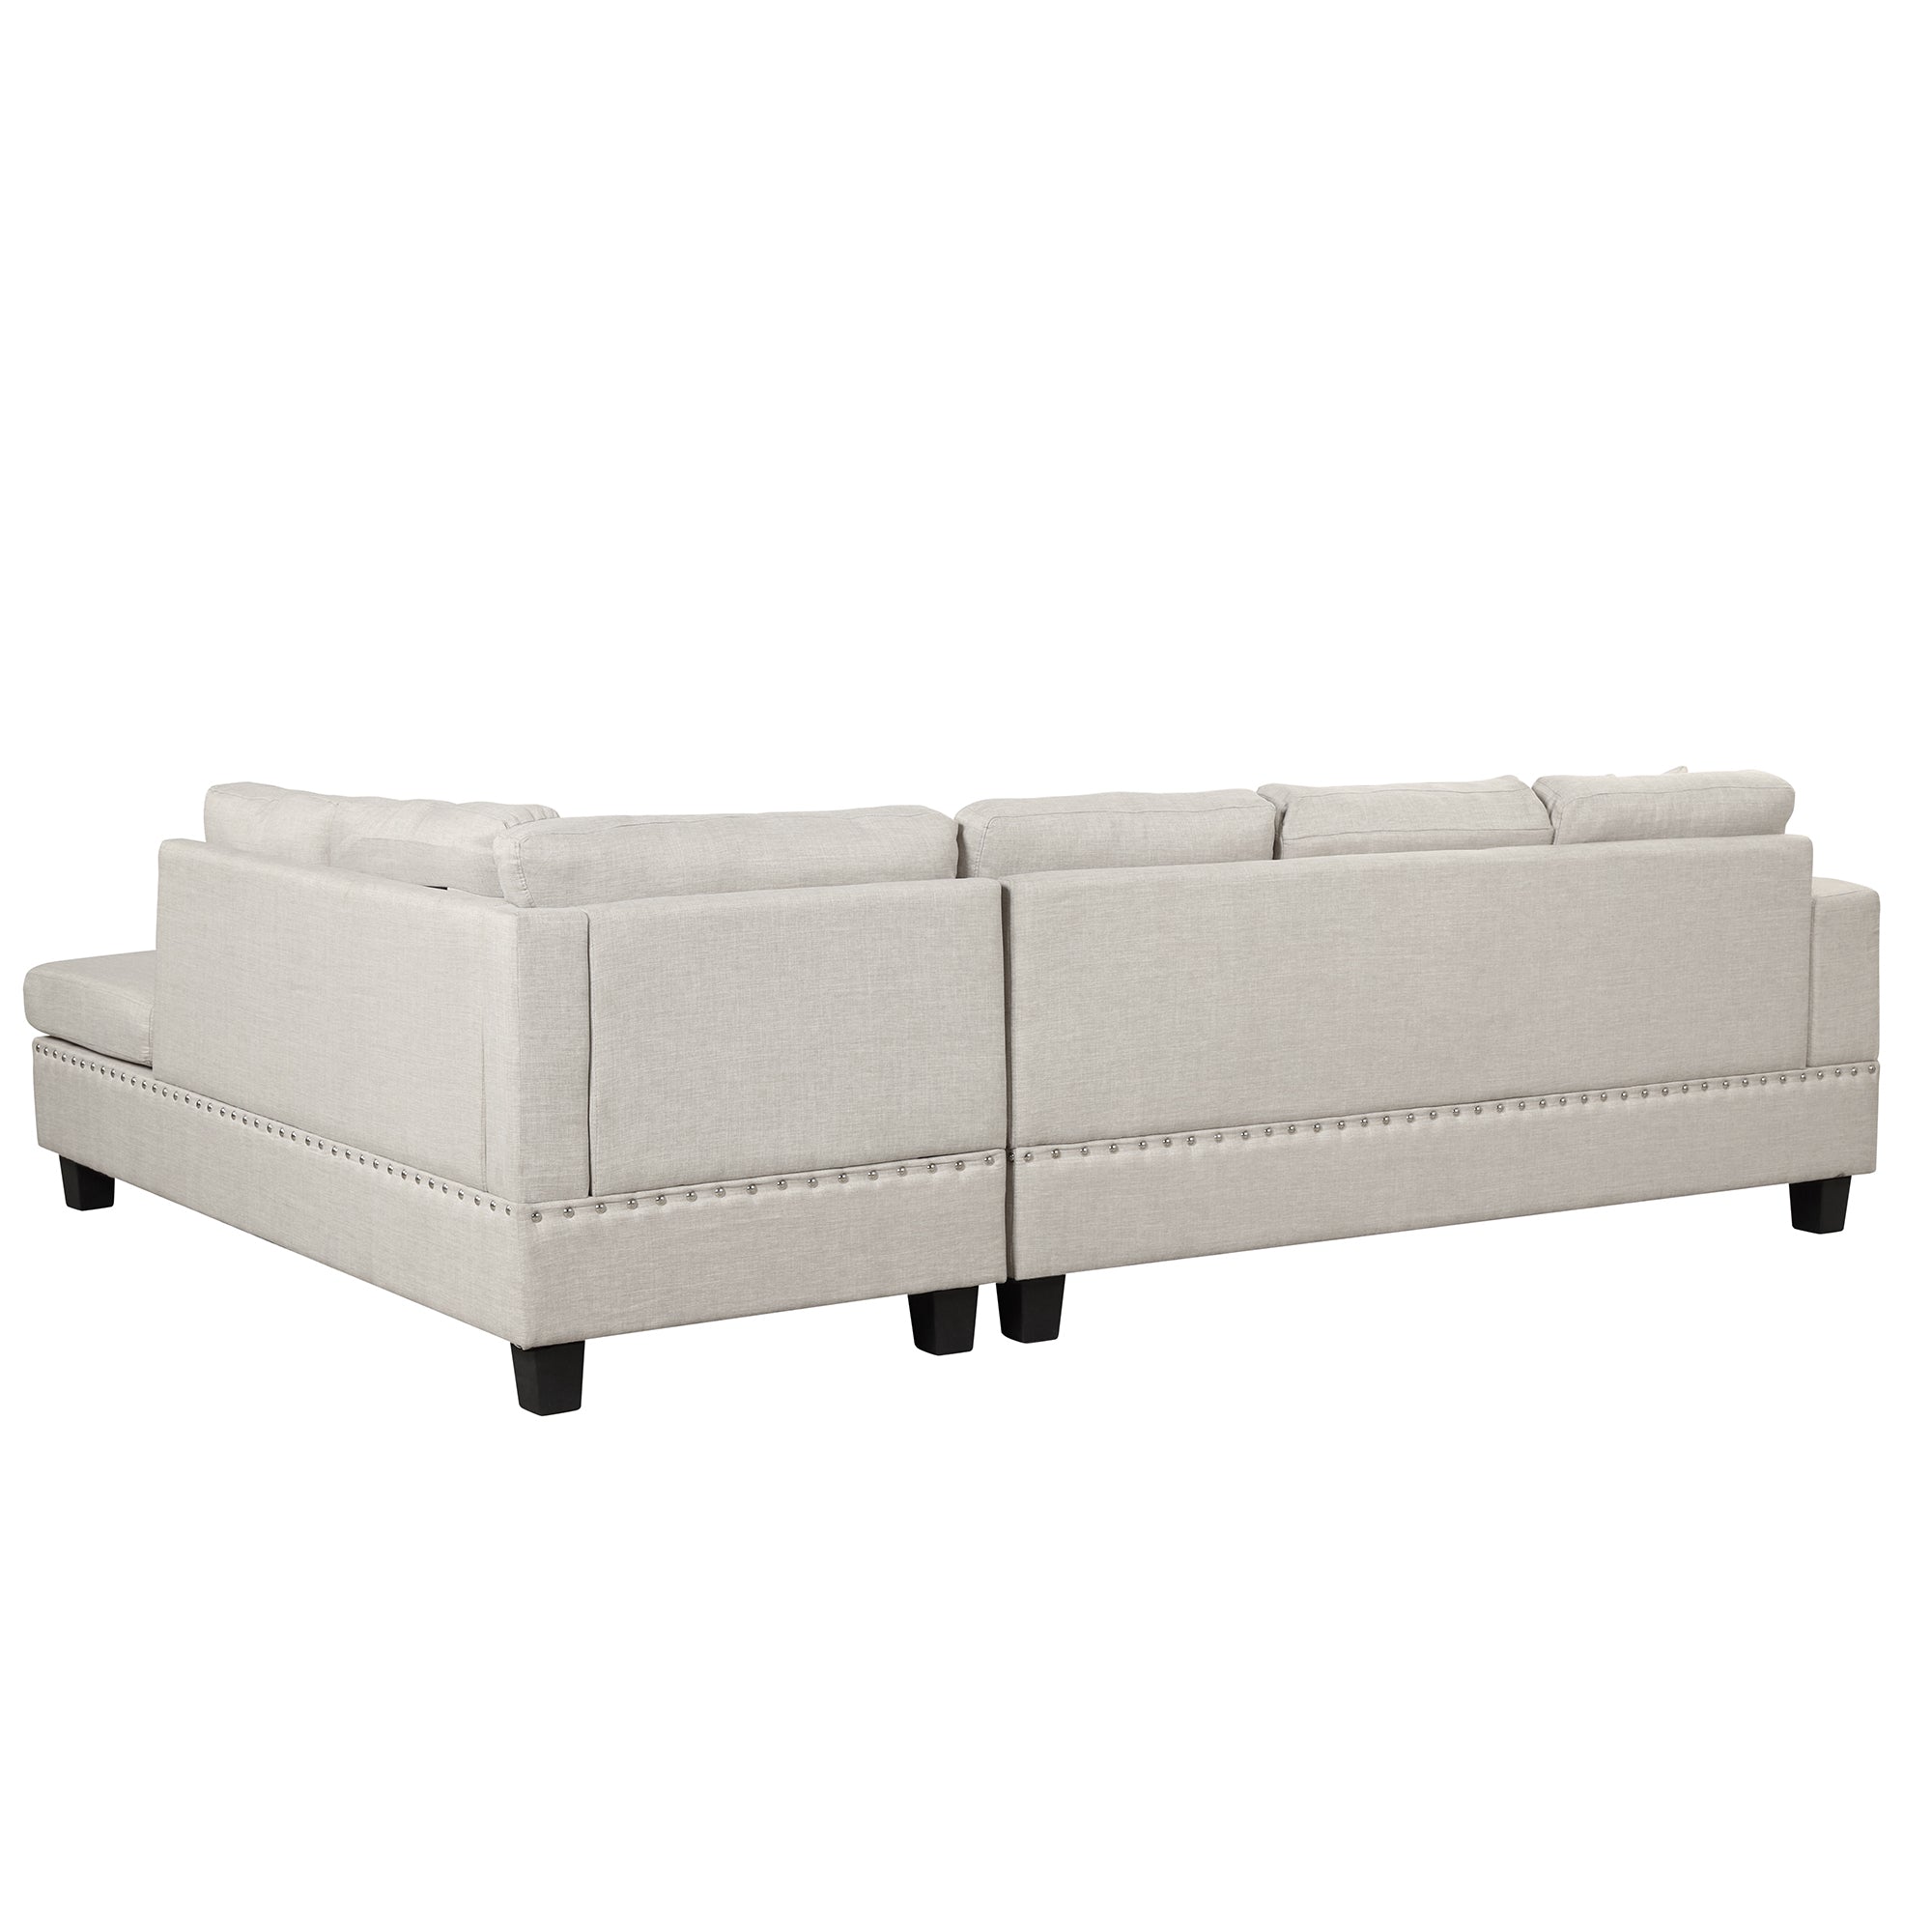 Gray L-Shaped Sectional Sofa with Storage Ottoman-Stationary Sectionals-American Furniture Outlet